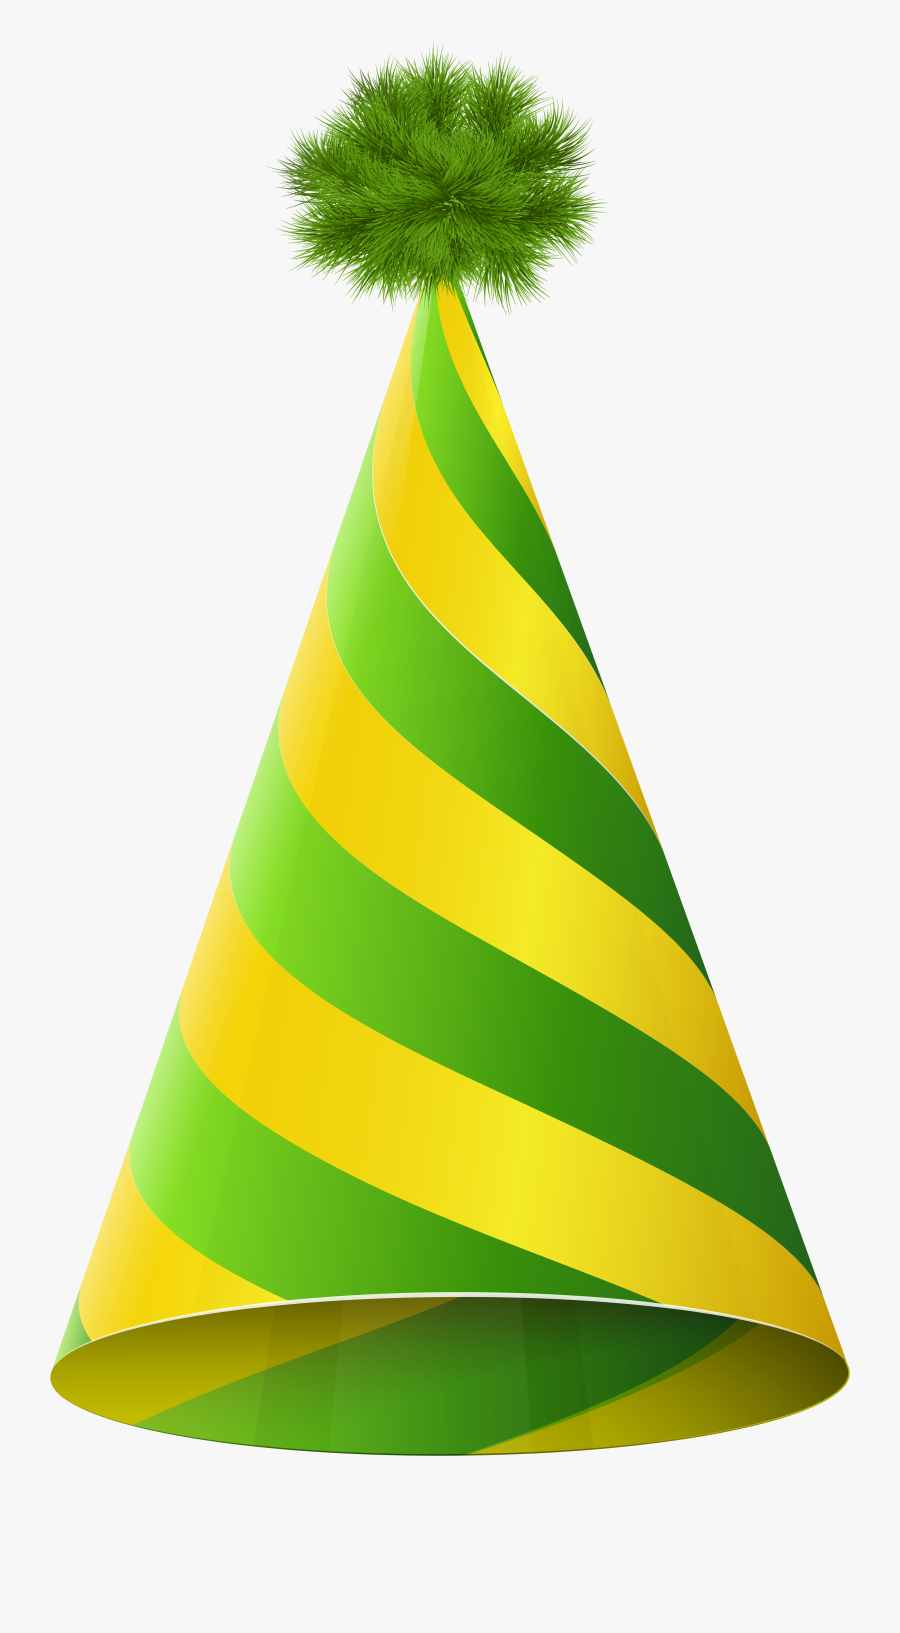 Party Hat Green Yellow Transparent Png Clip Art Imageu200b - Green And Yellow Party Hat, Transparent Clipart